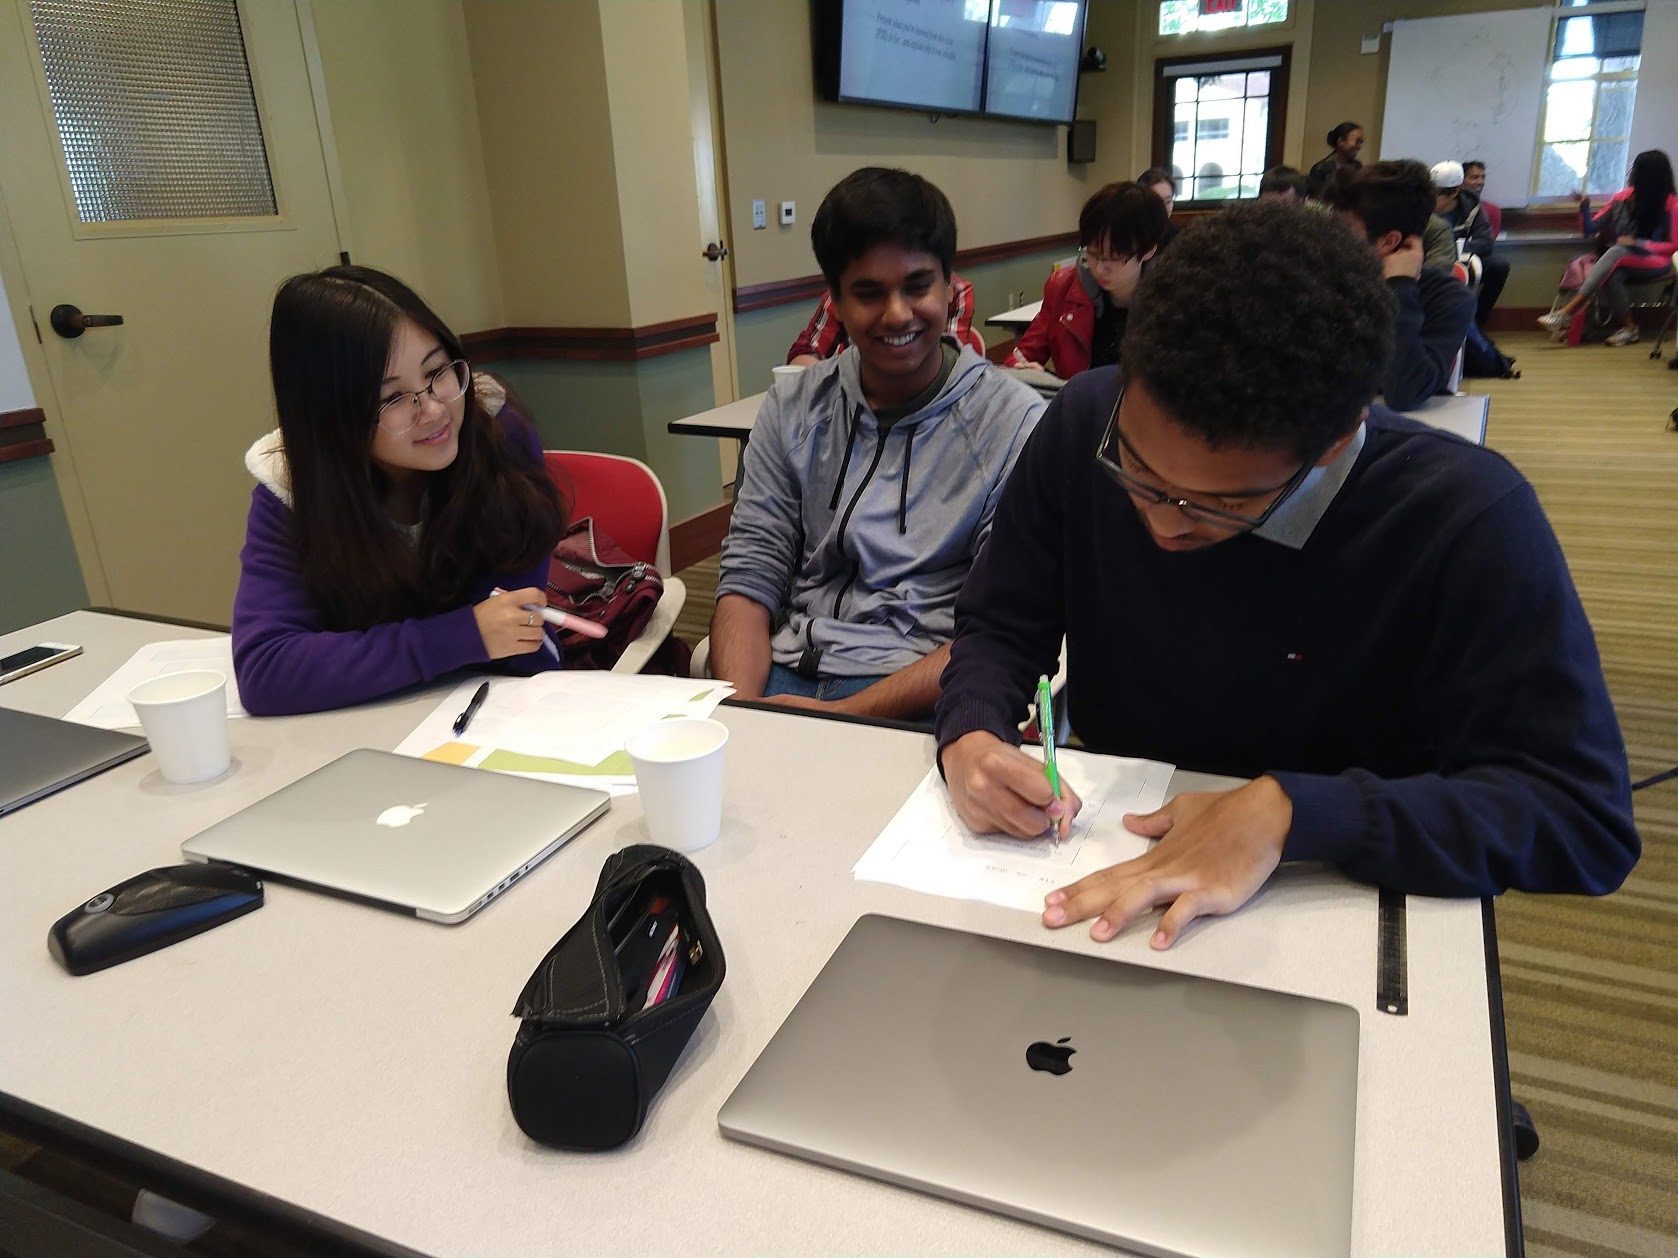 Graduate students using the “flipped classroom” format in the Foundations of Software Engineering class (FSE)